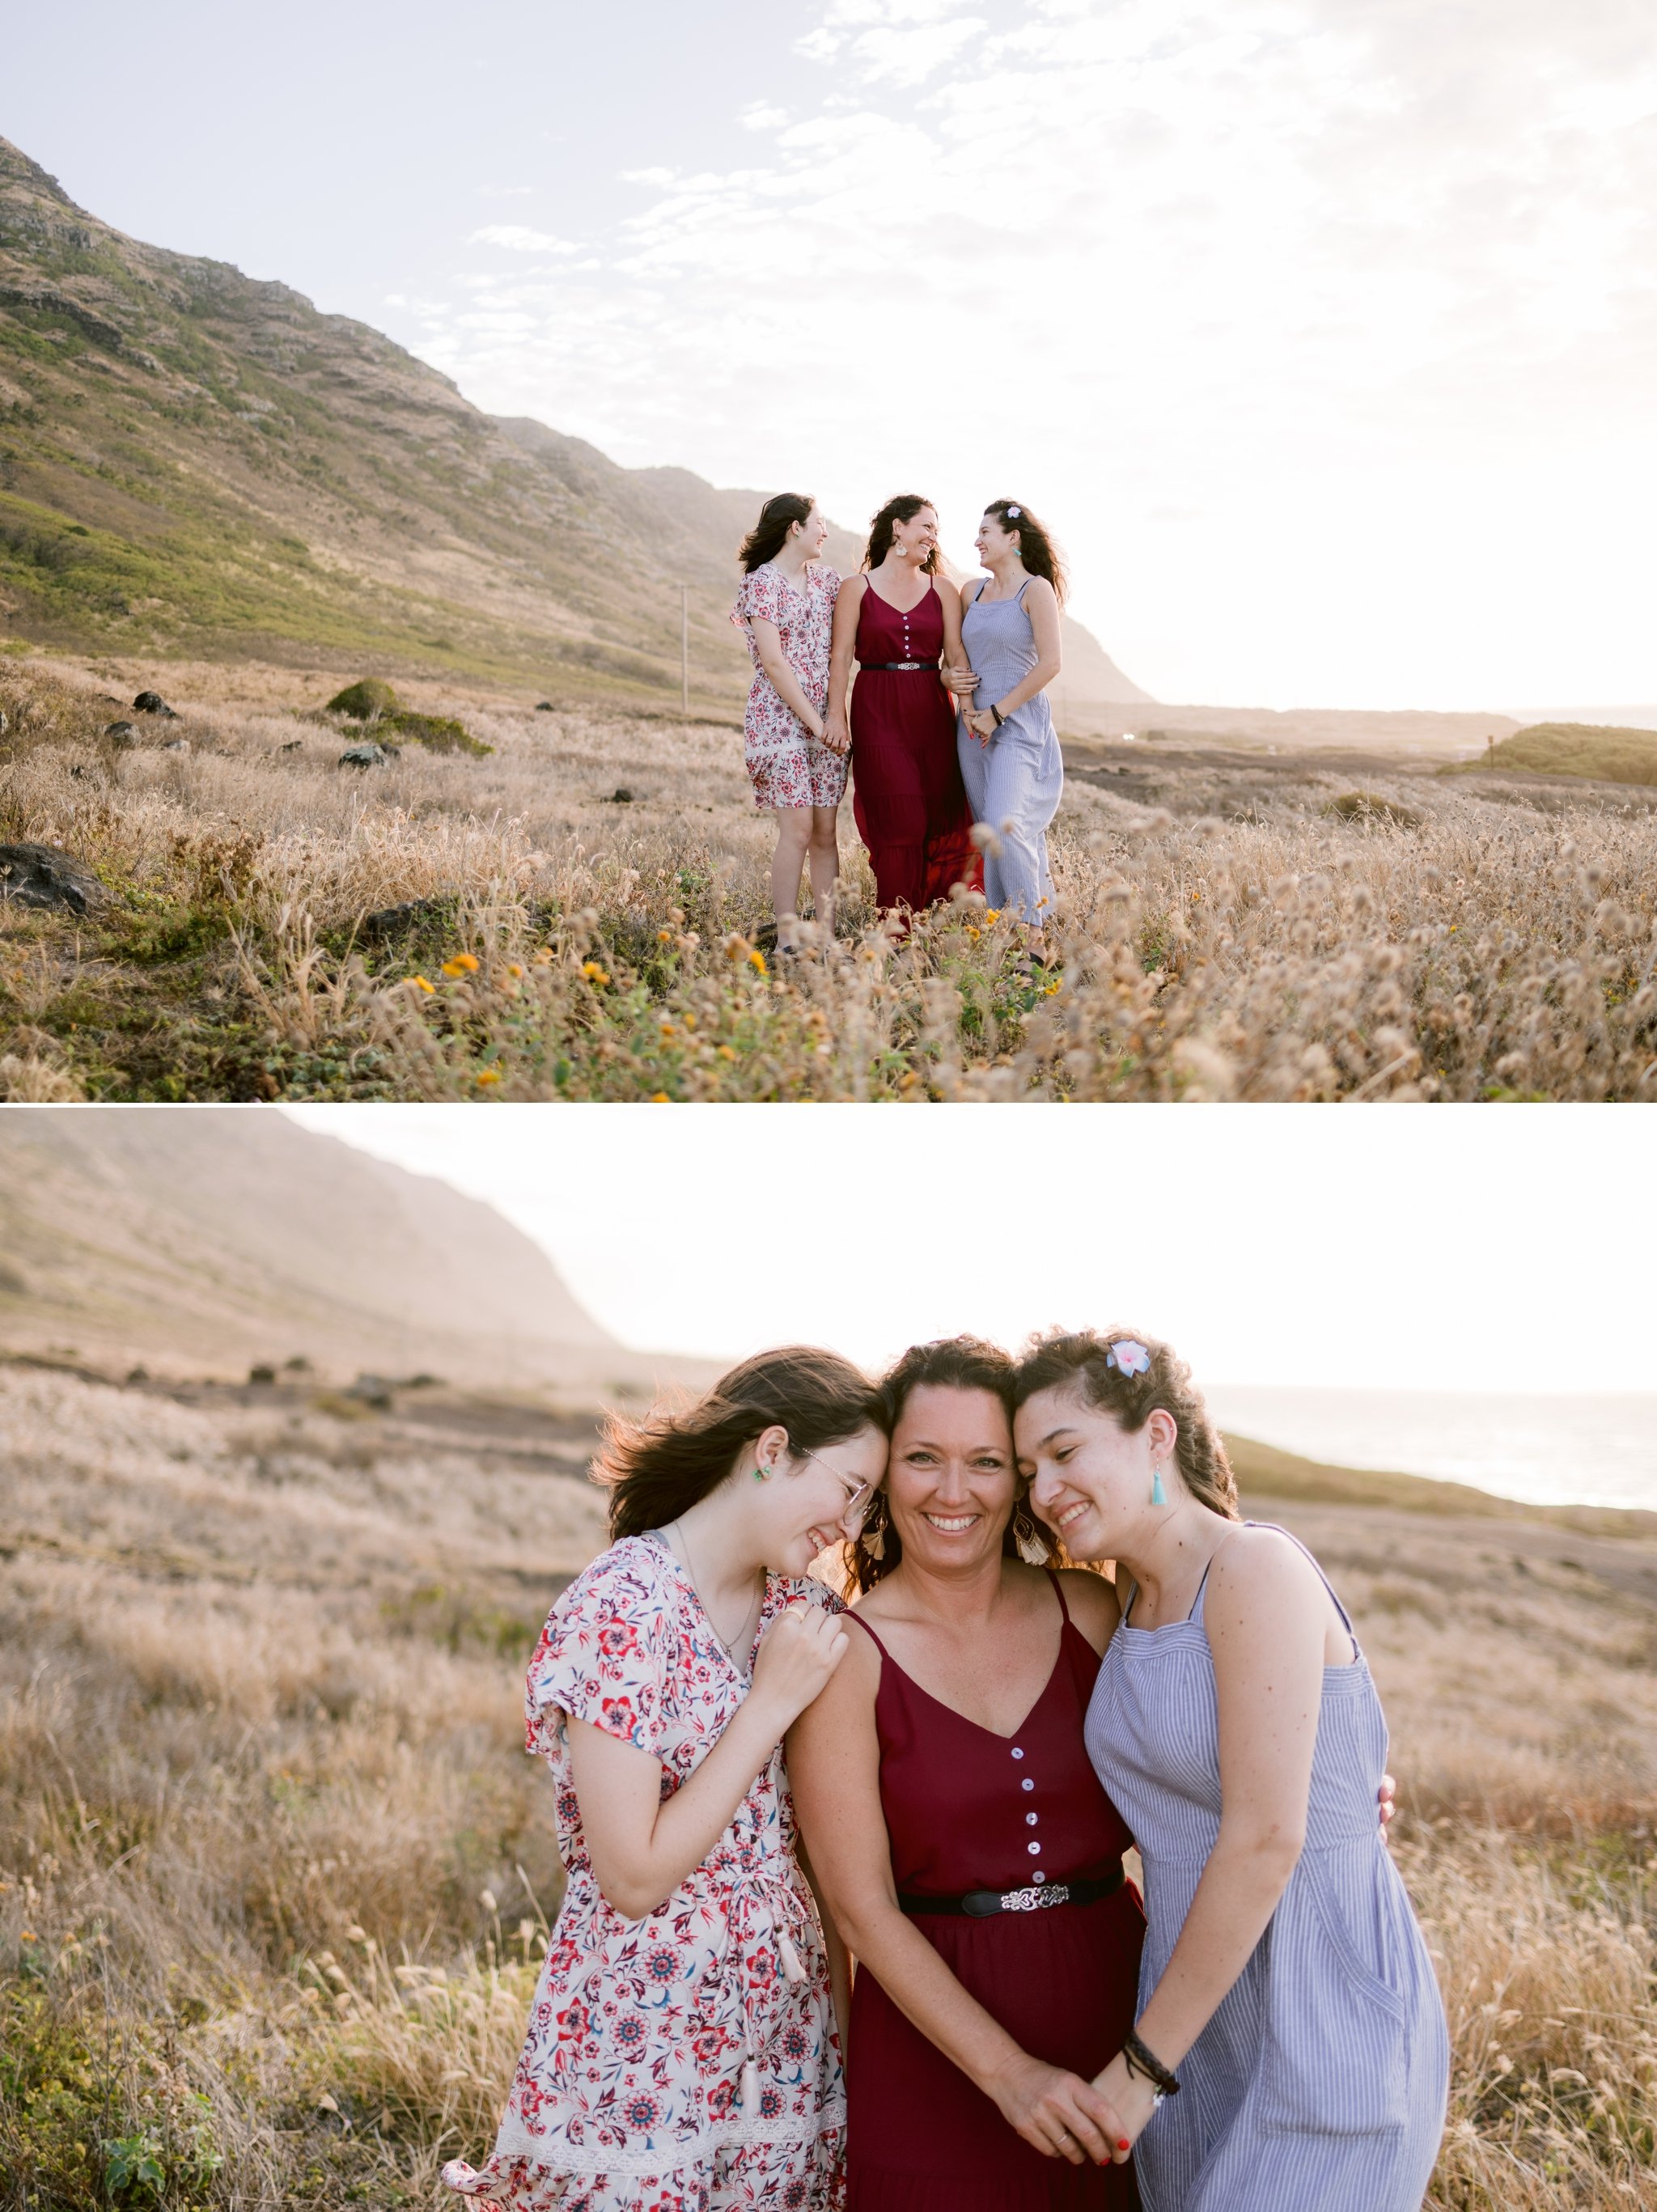 Sunset Family Photography Session on Oahu